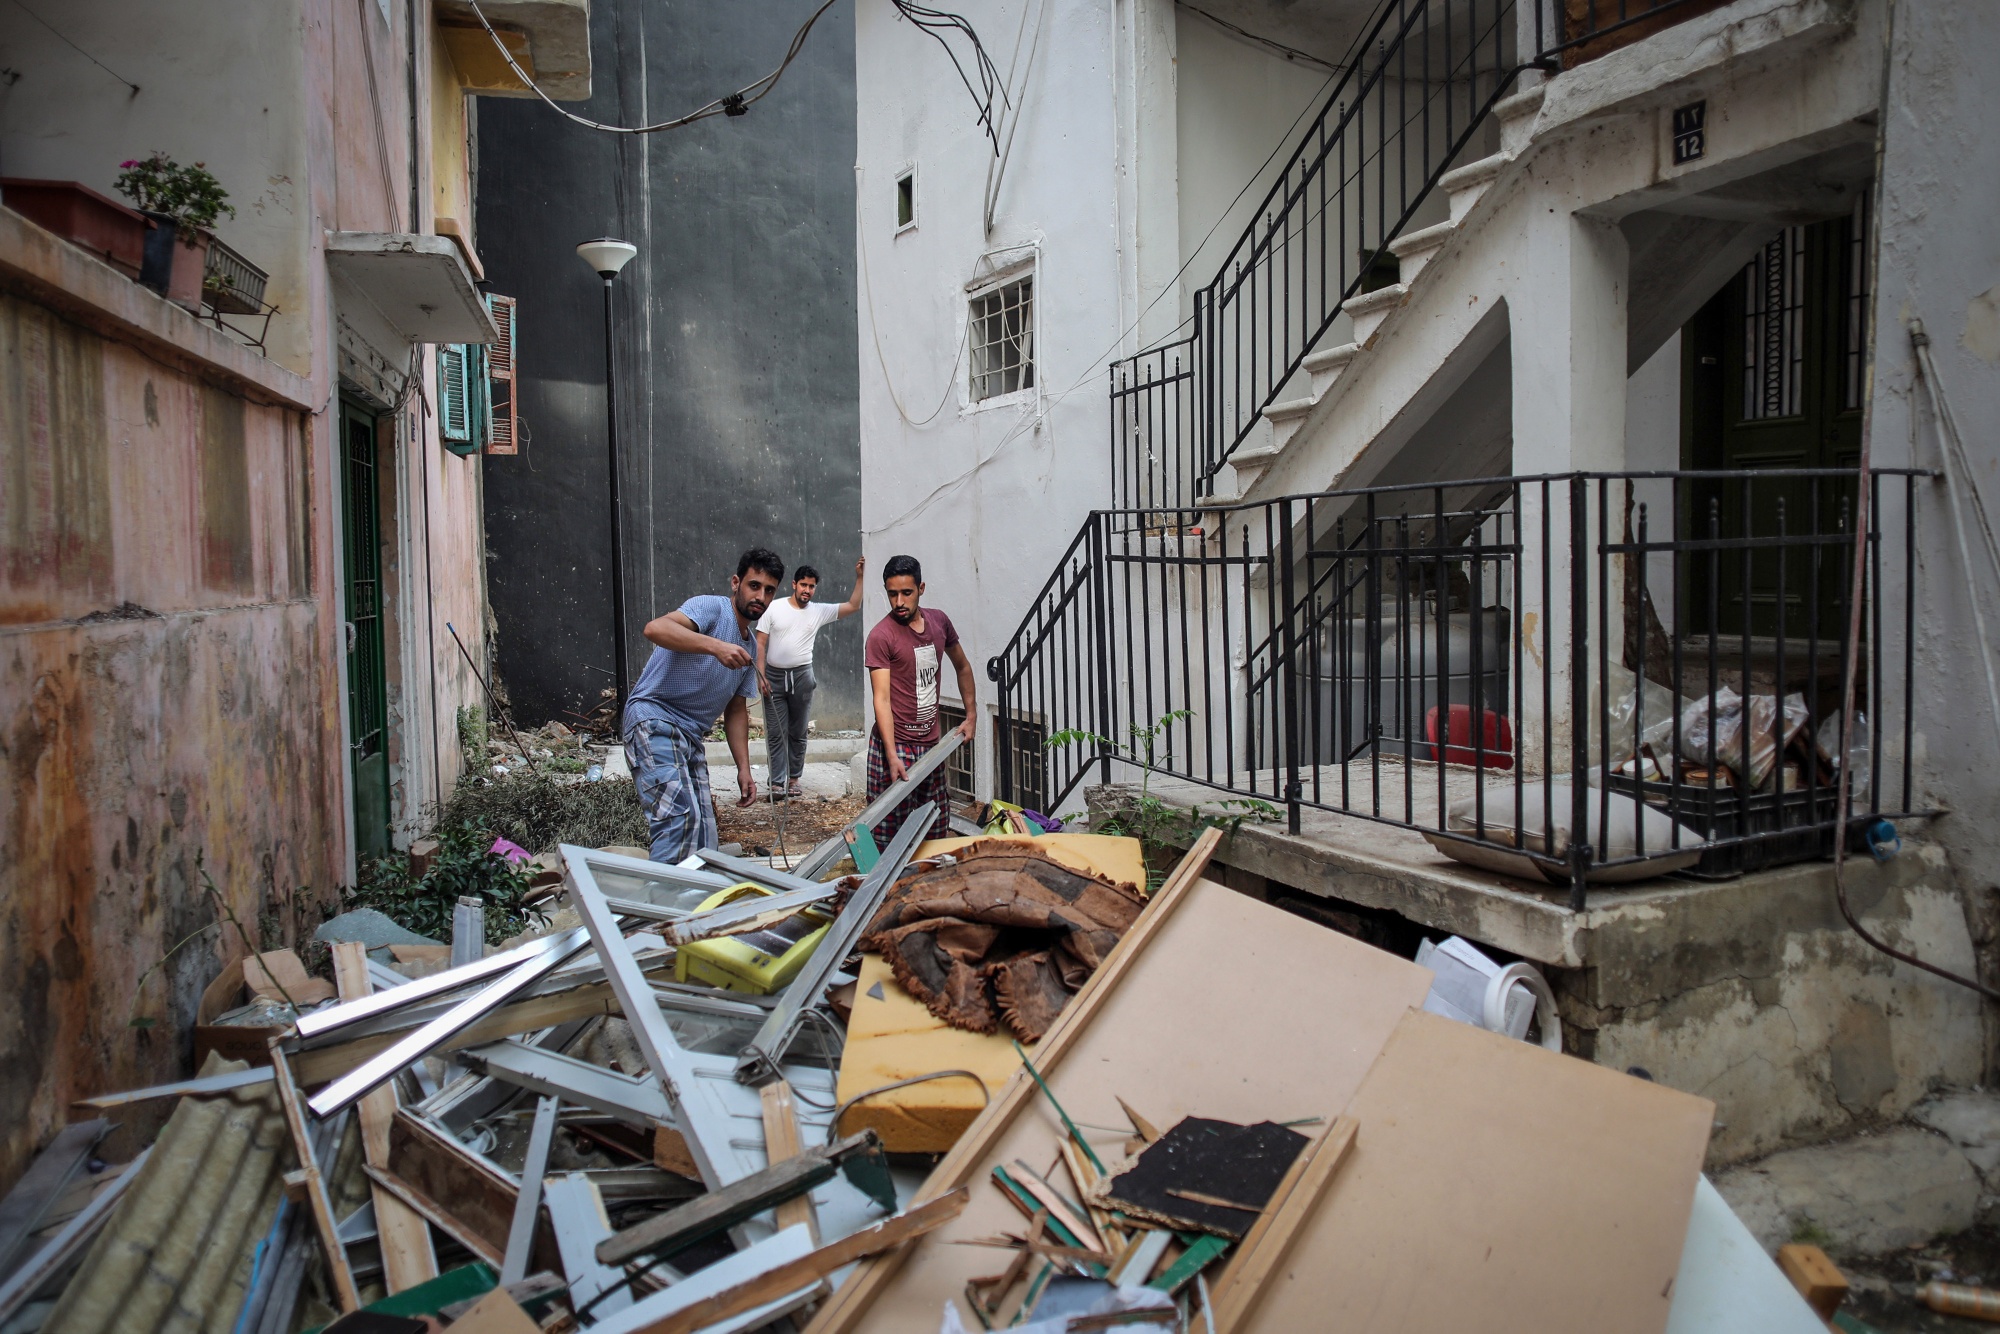 Residents clear broken furniture and debris from a residential building&nbsp;in Beirut, Lebanon, on Aug. 12.&nbsp;